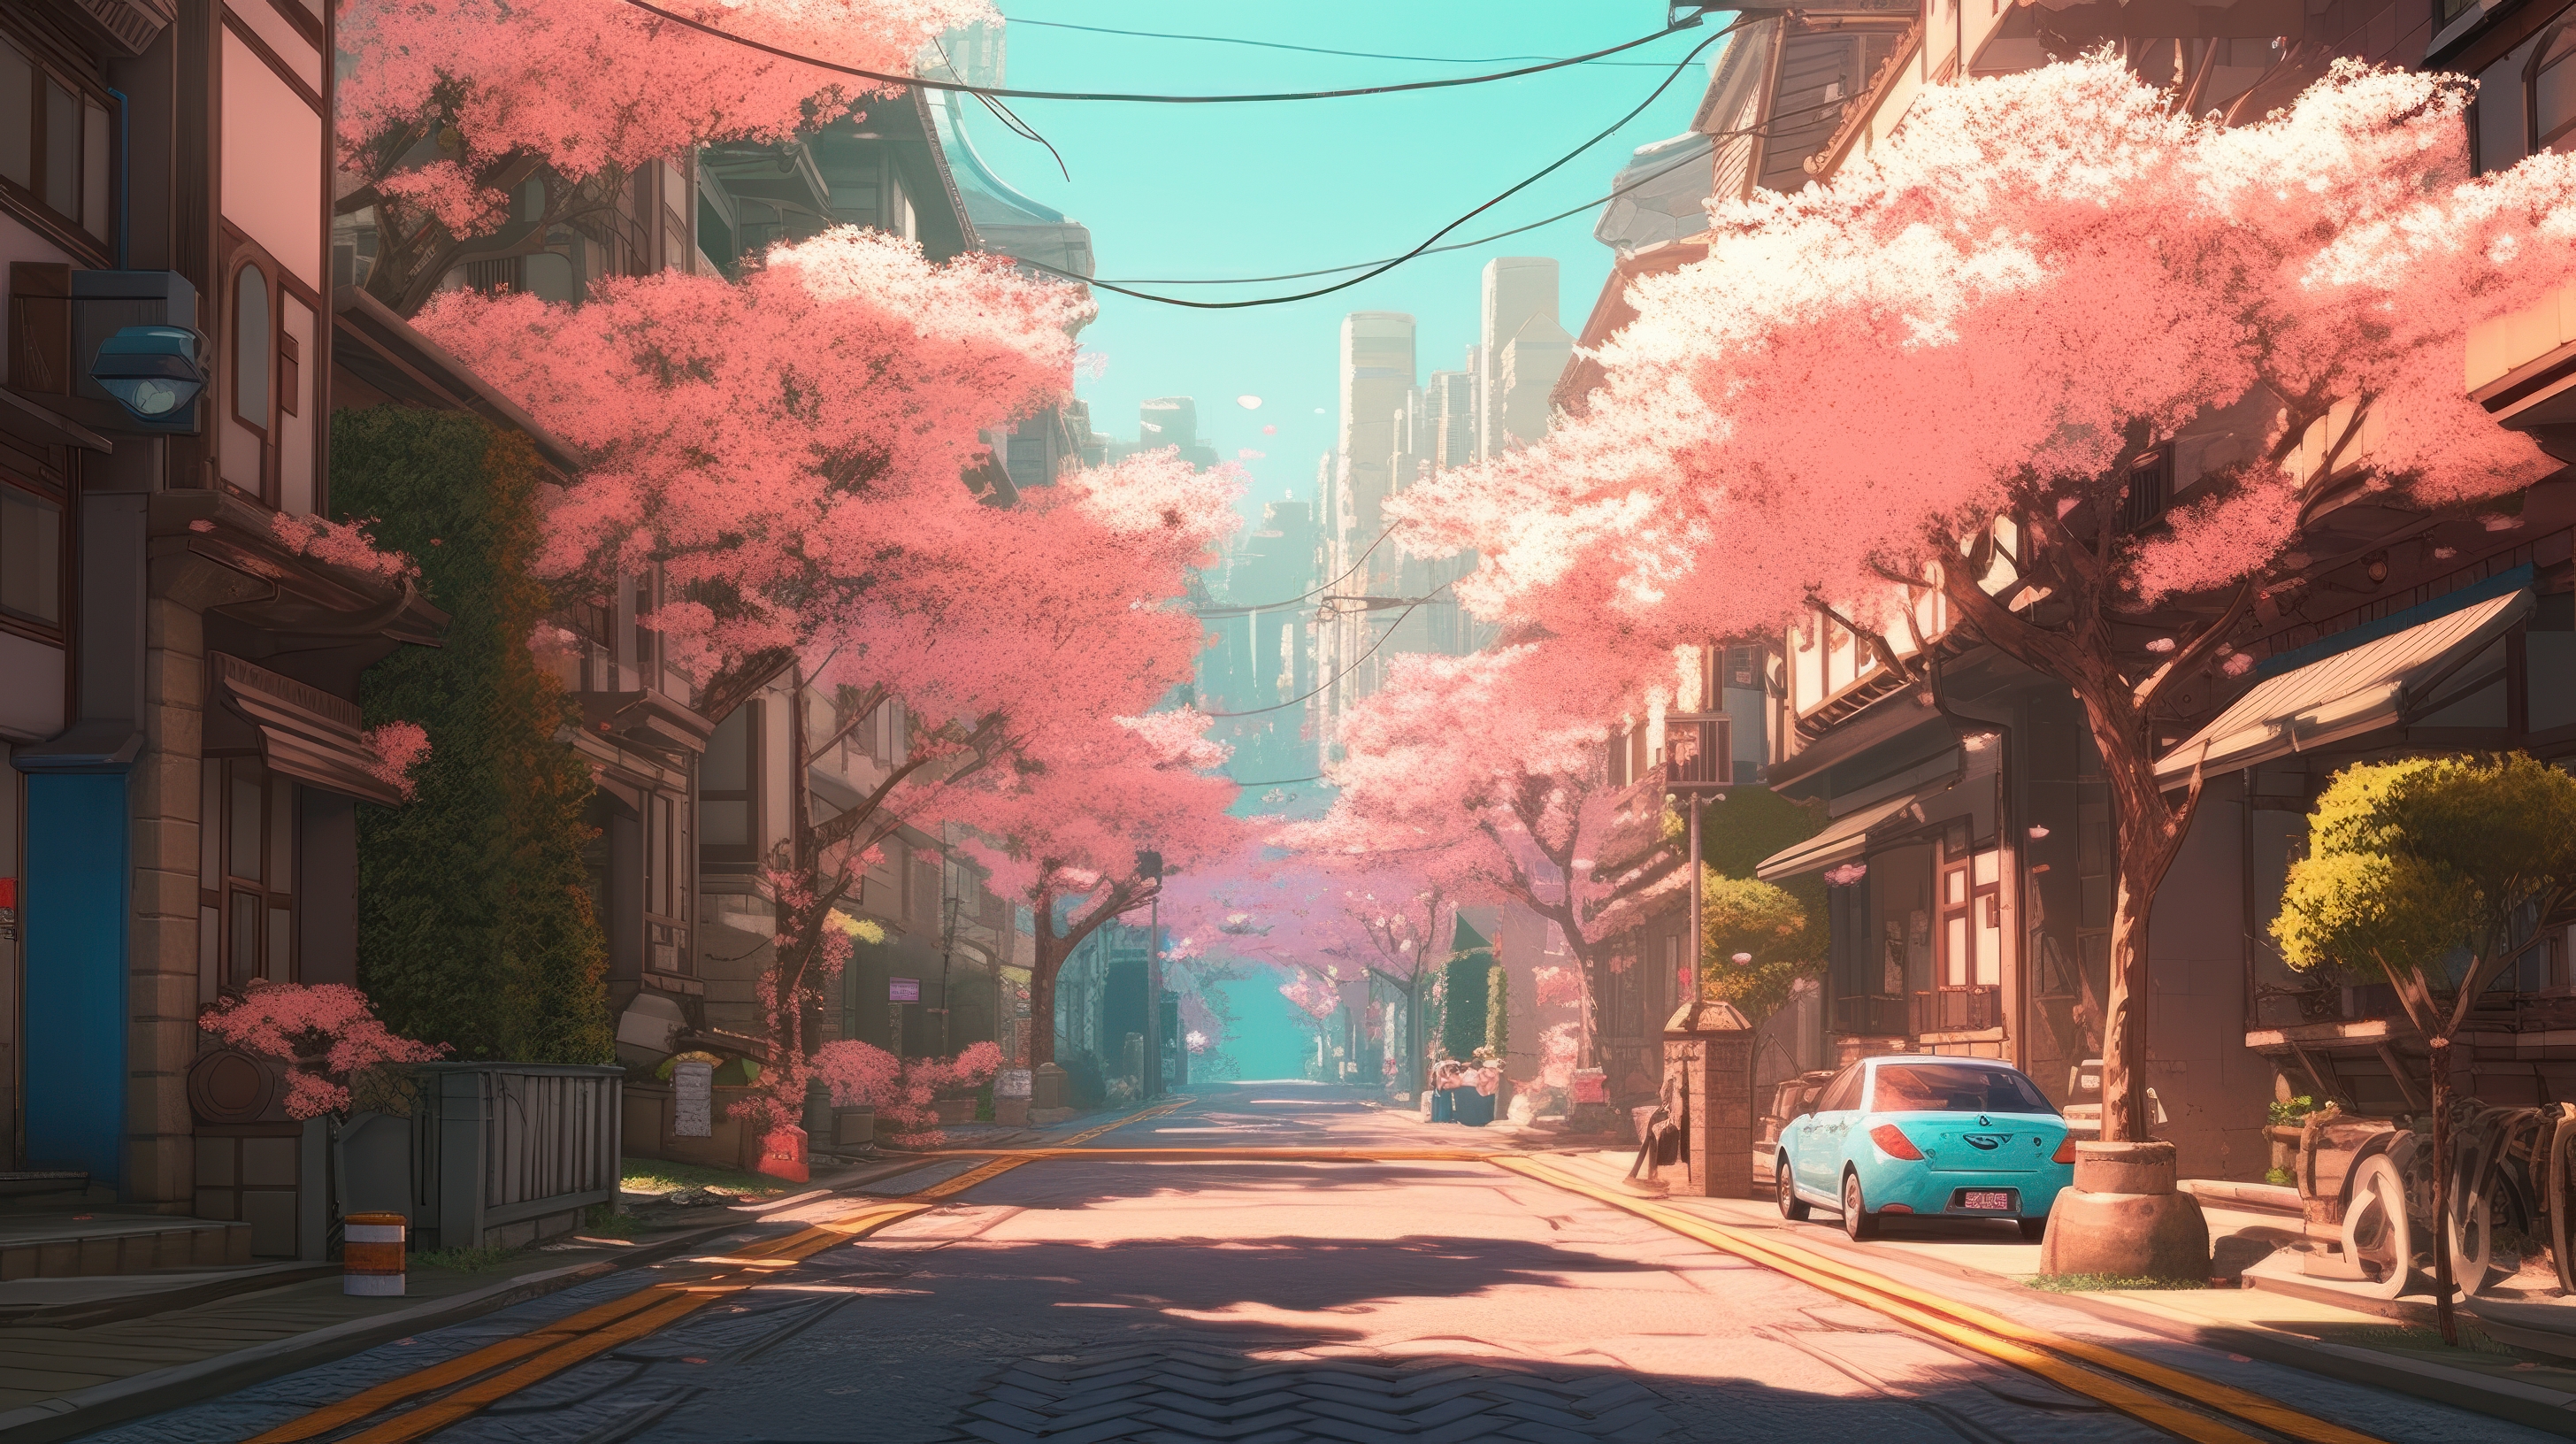 General 2912x1632 AI art illustration city colorful trees street building car cherry blossom